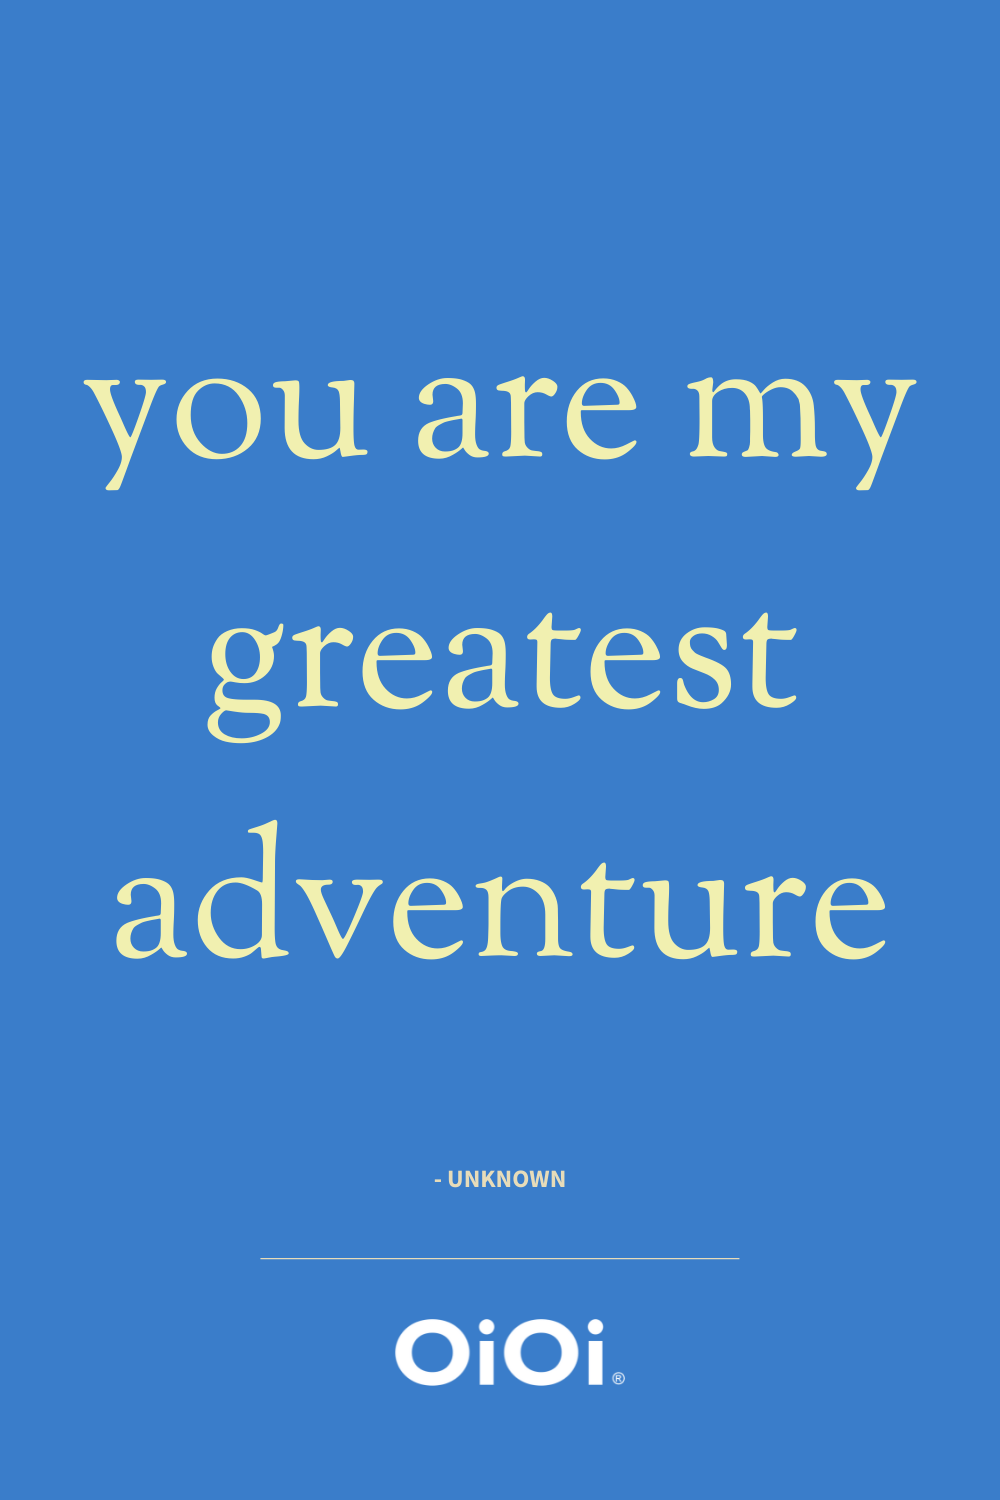 parenthood quote: you are my greatest adventure